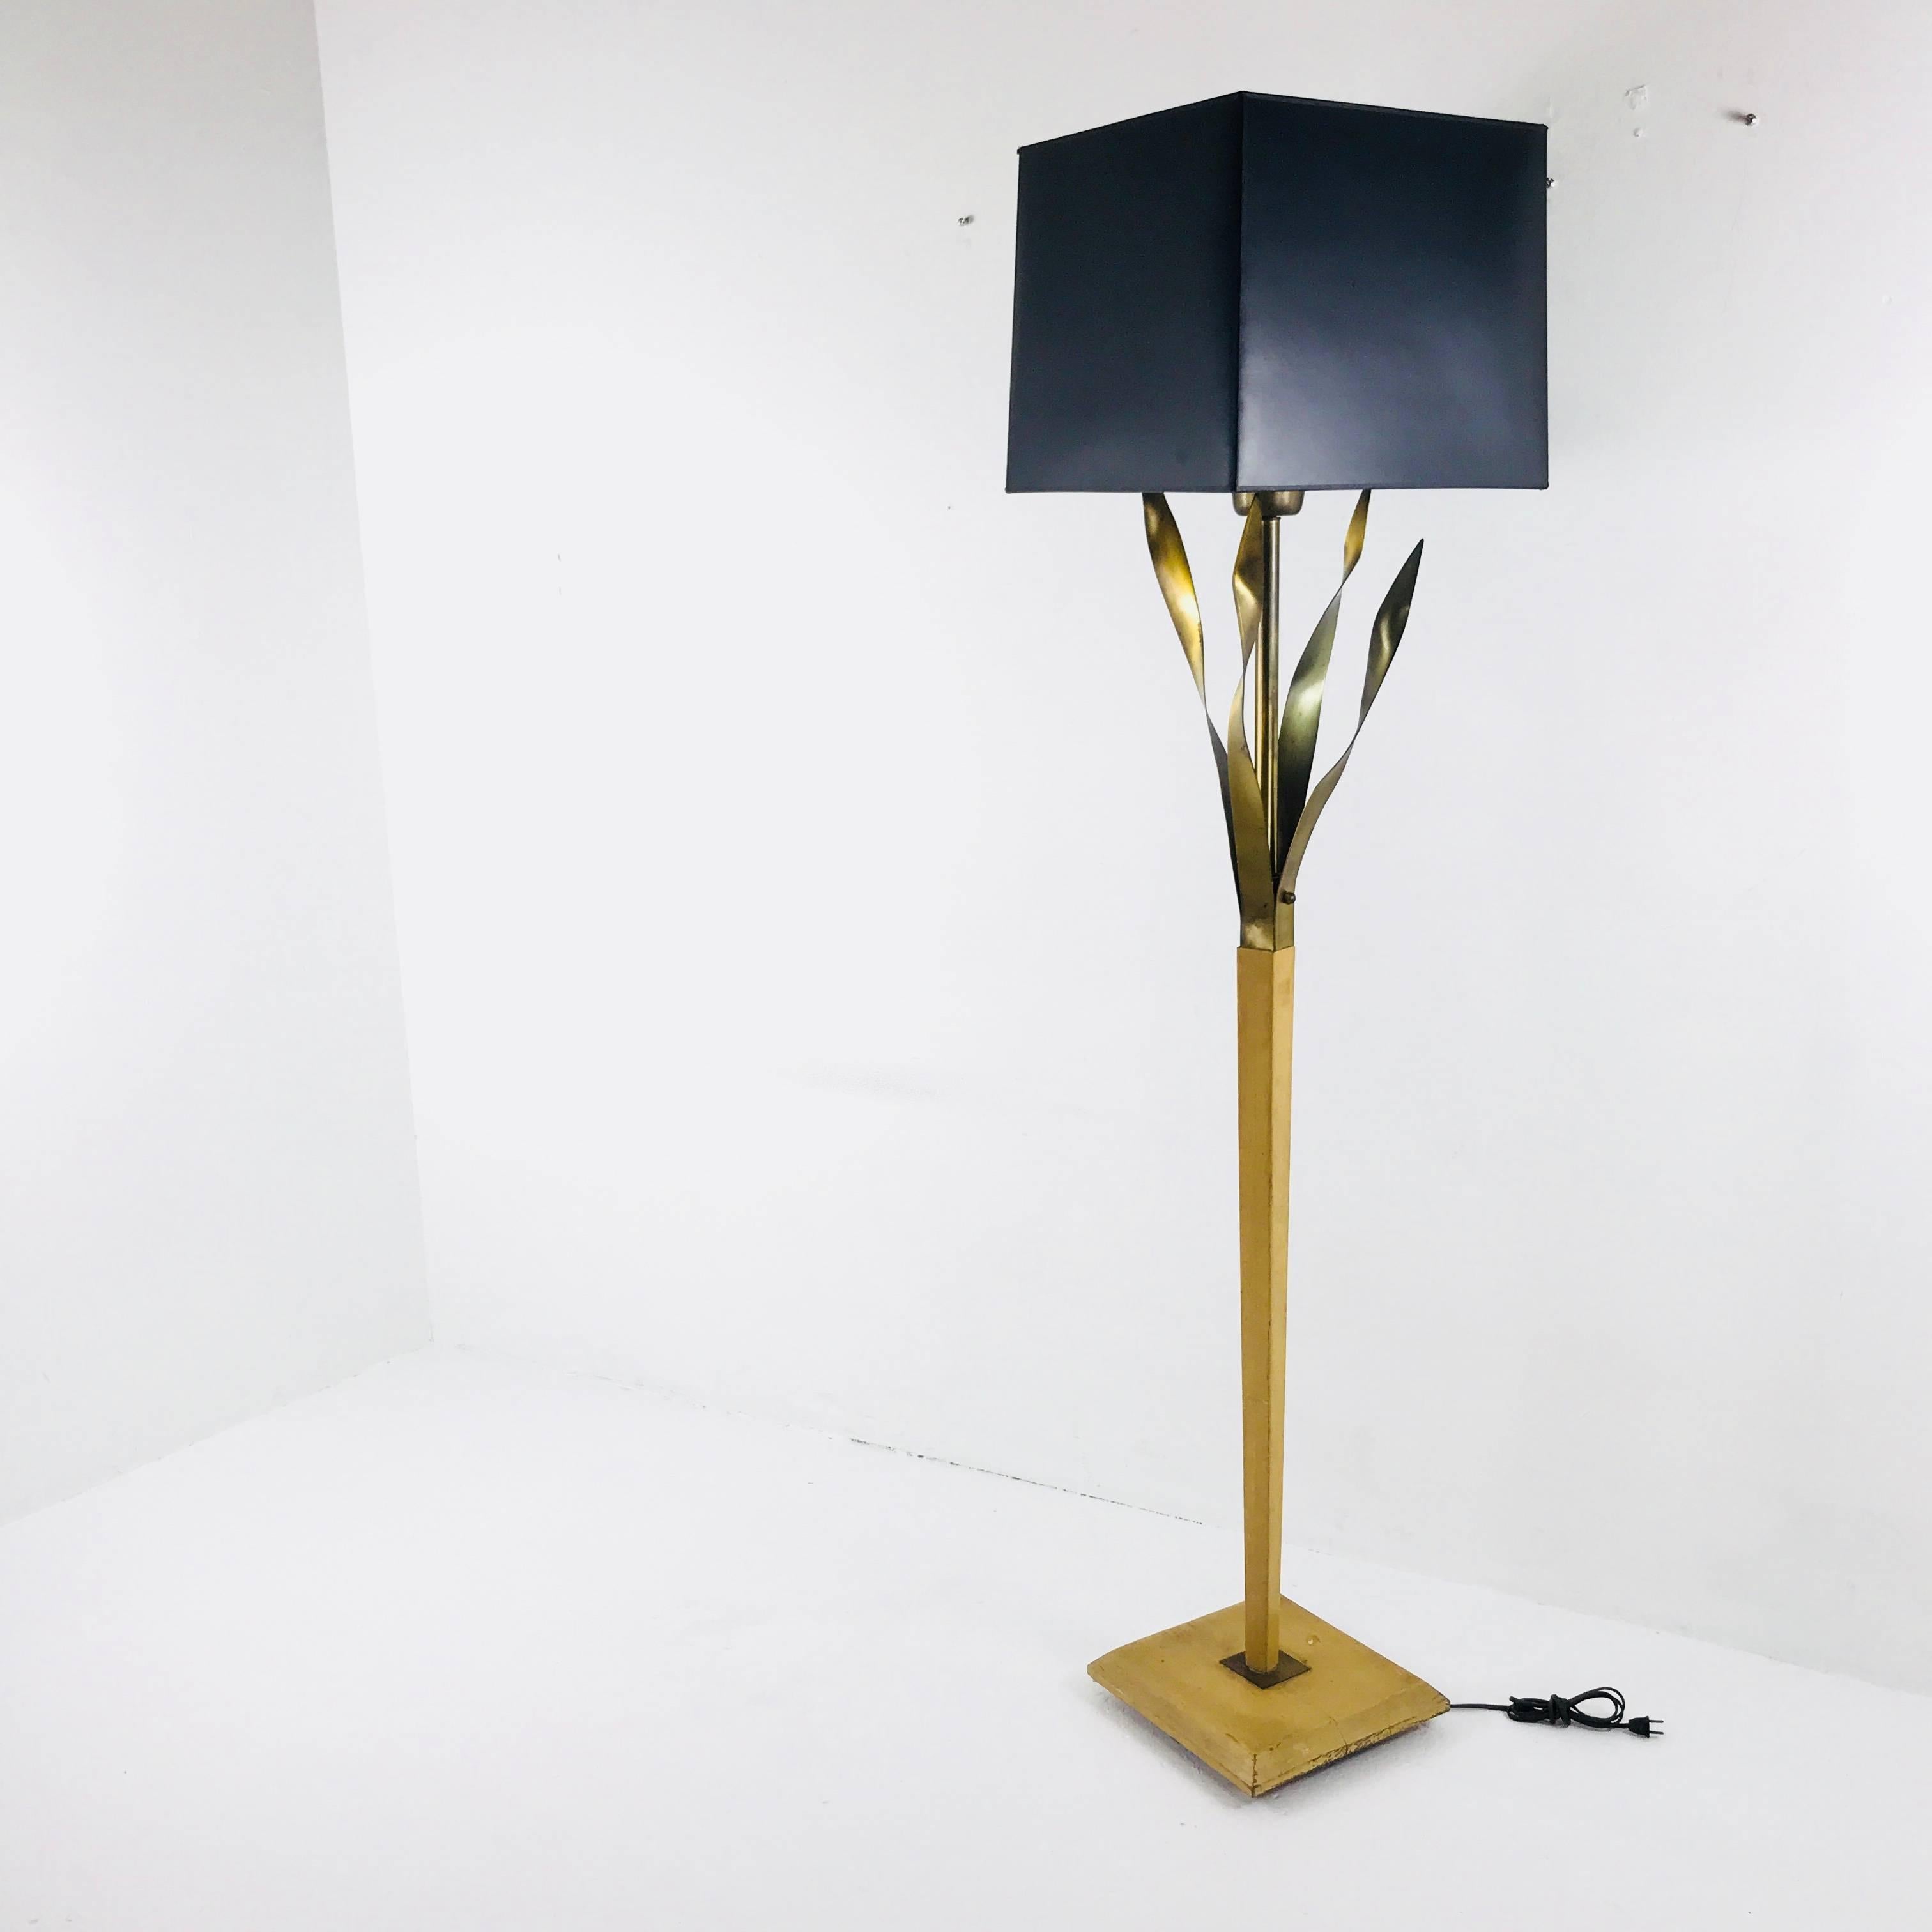 Brass and wood floor lamp shown with square shade, which is not included. The wood on the lamp needs to be refinished due to wear and tear and also retains original wiring. A shade will be required due to the bulb being exposed. There is no area to